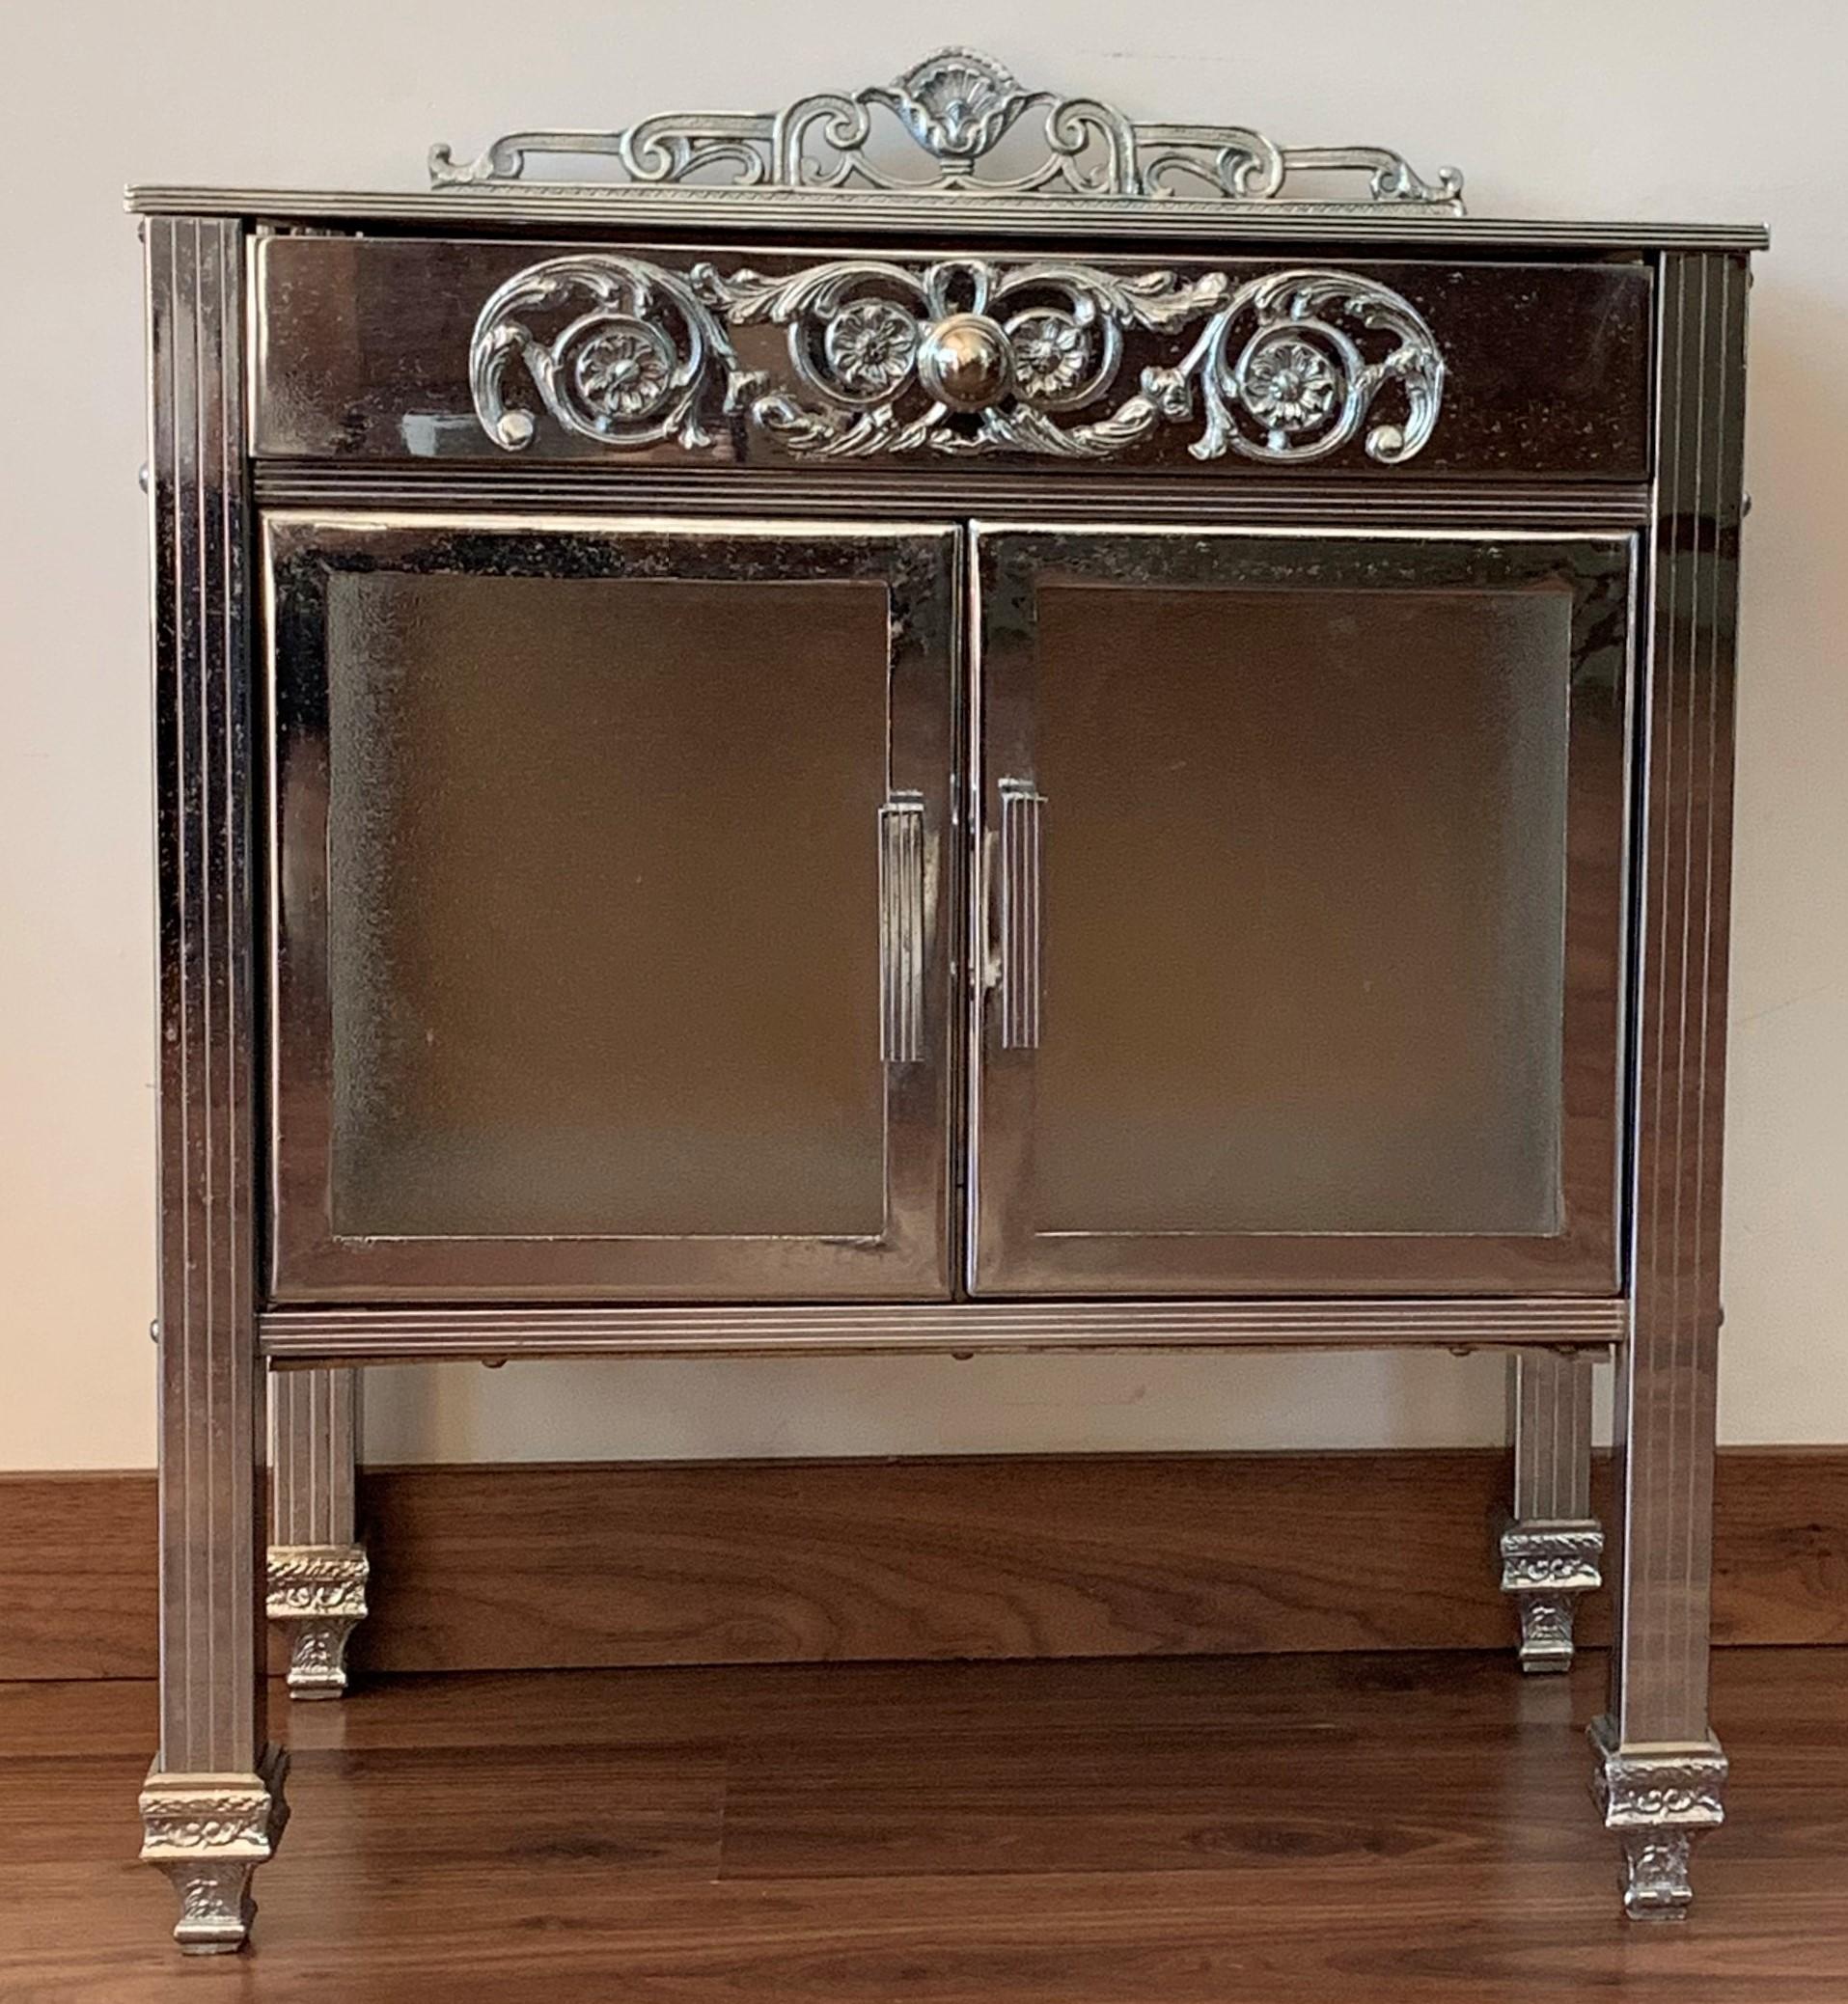 Beautiful 20th century French polished brass side table or nightstand or étagère with rollers, black glass top, and drawer and crest adorned with floral copper details around.